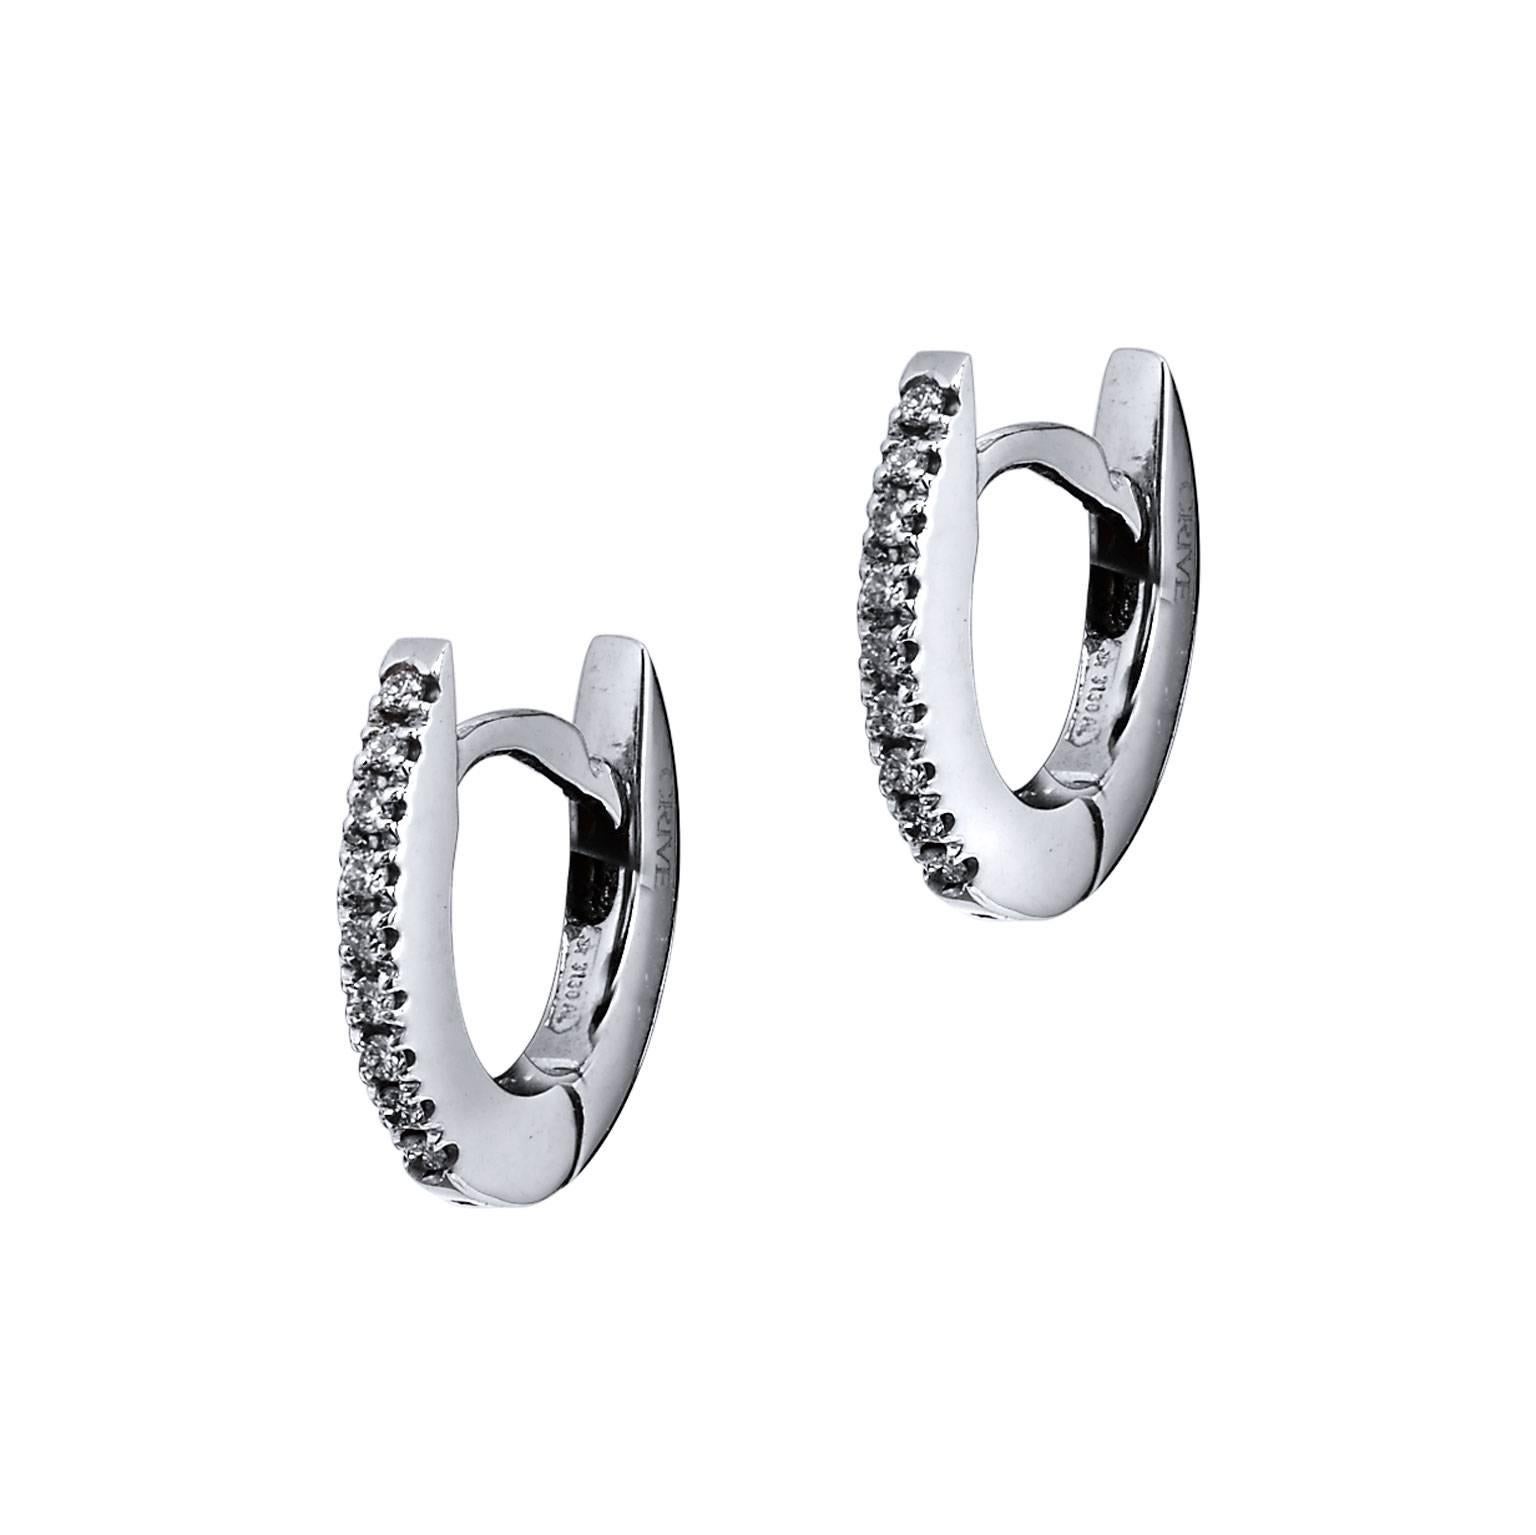 Enjoy these 18 karat white gold small diamond hoop earrings that are the next casual and chic addition needed in one's wardrobe. With 0.07 carat of diamond in color G and clarity SI, these darling hoops are sweet and swank. 